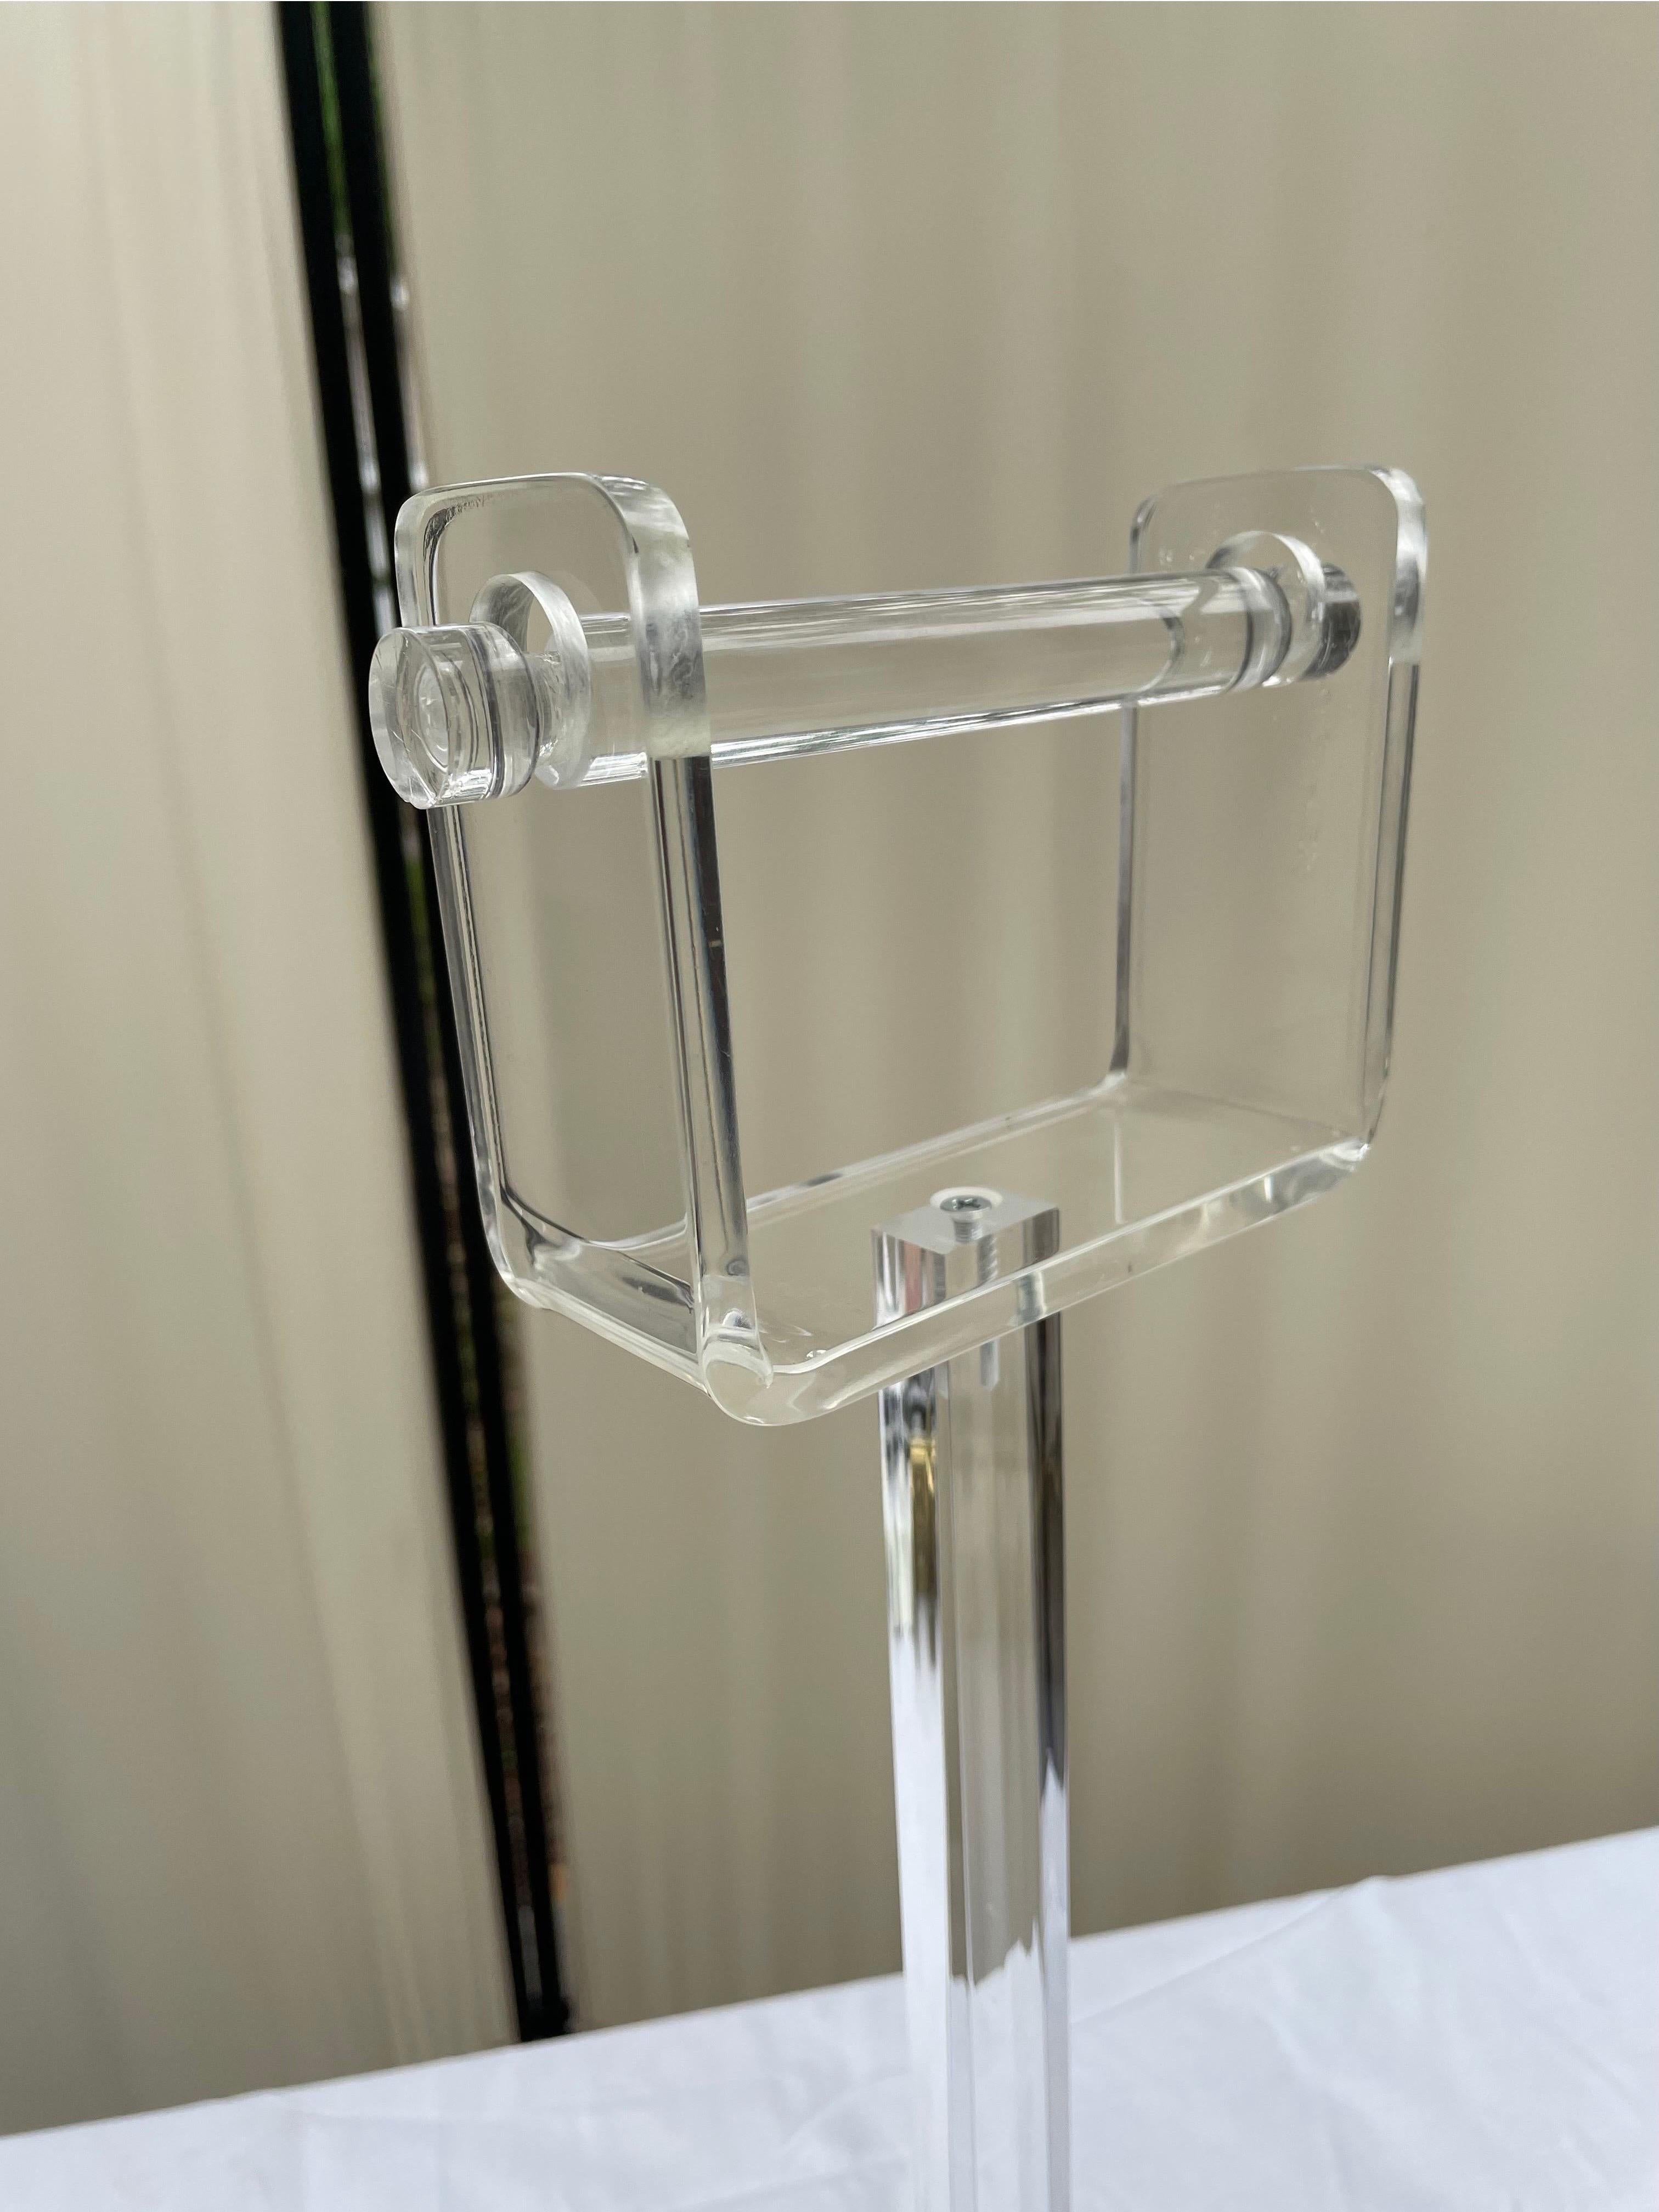 Mid-Century Modern clear lucite free standing toilet paper holder. This item is super chic and totally translucent. Made in the USA during the 1970s, it is in fantastic condition. Replacing the roll of toilet paper is very easy to do. Simple lift